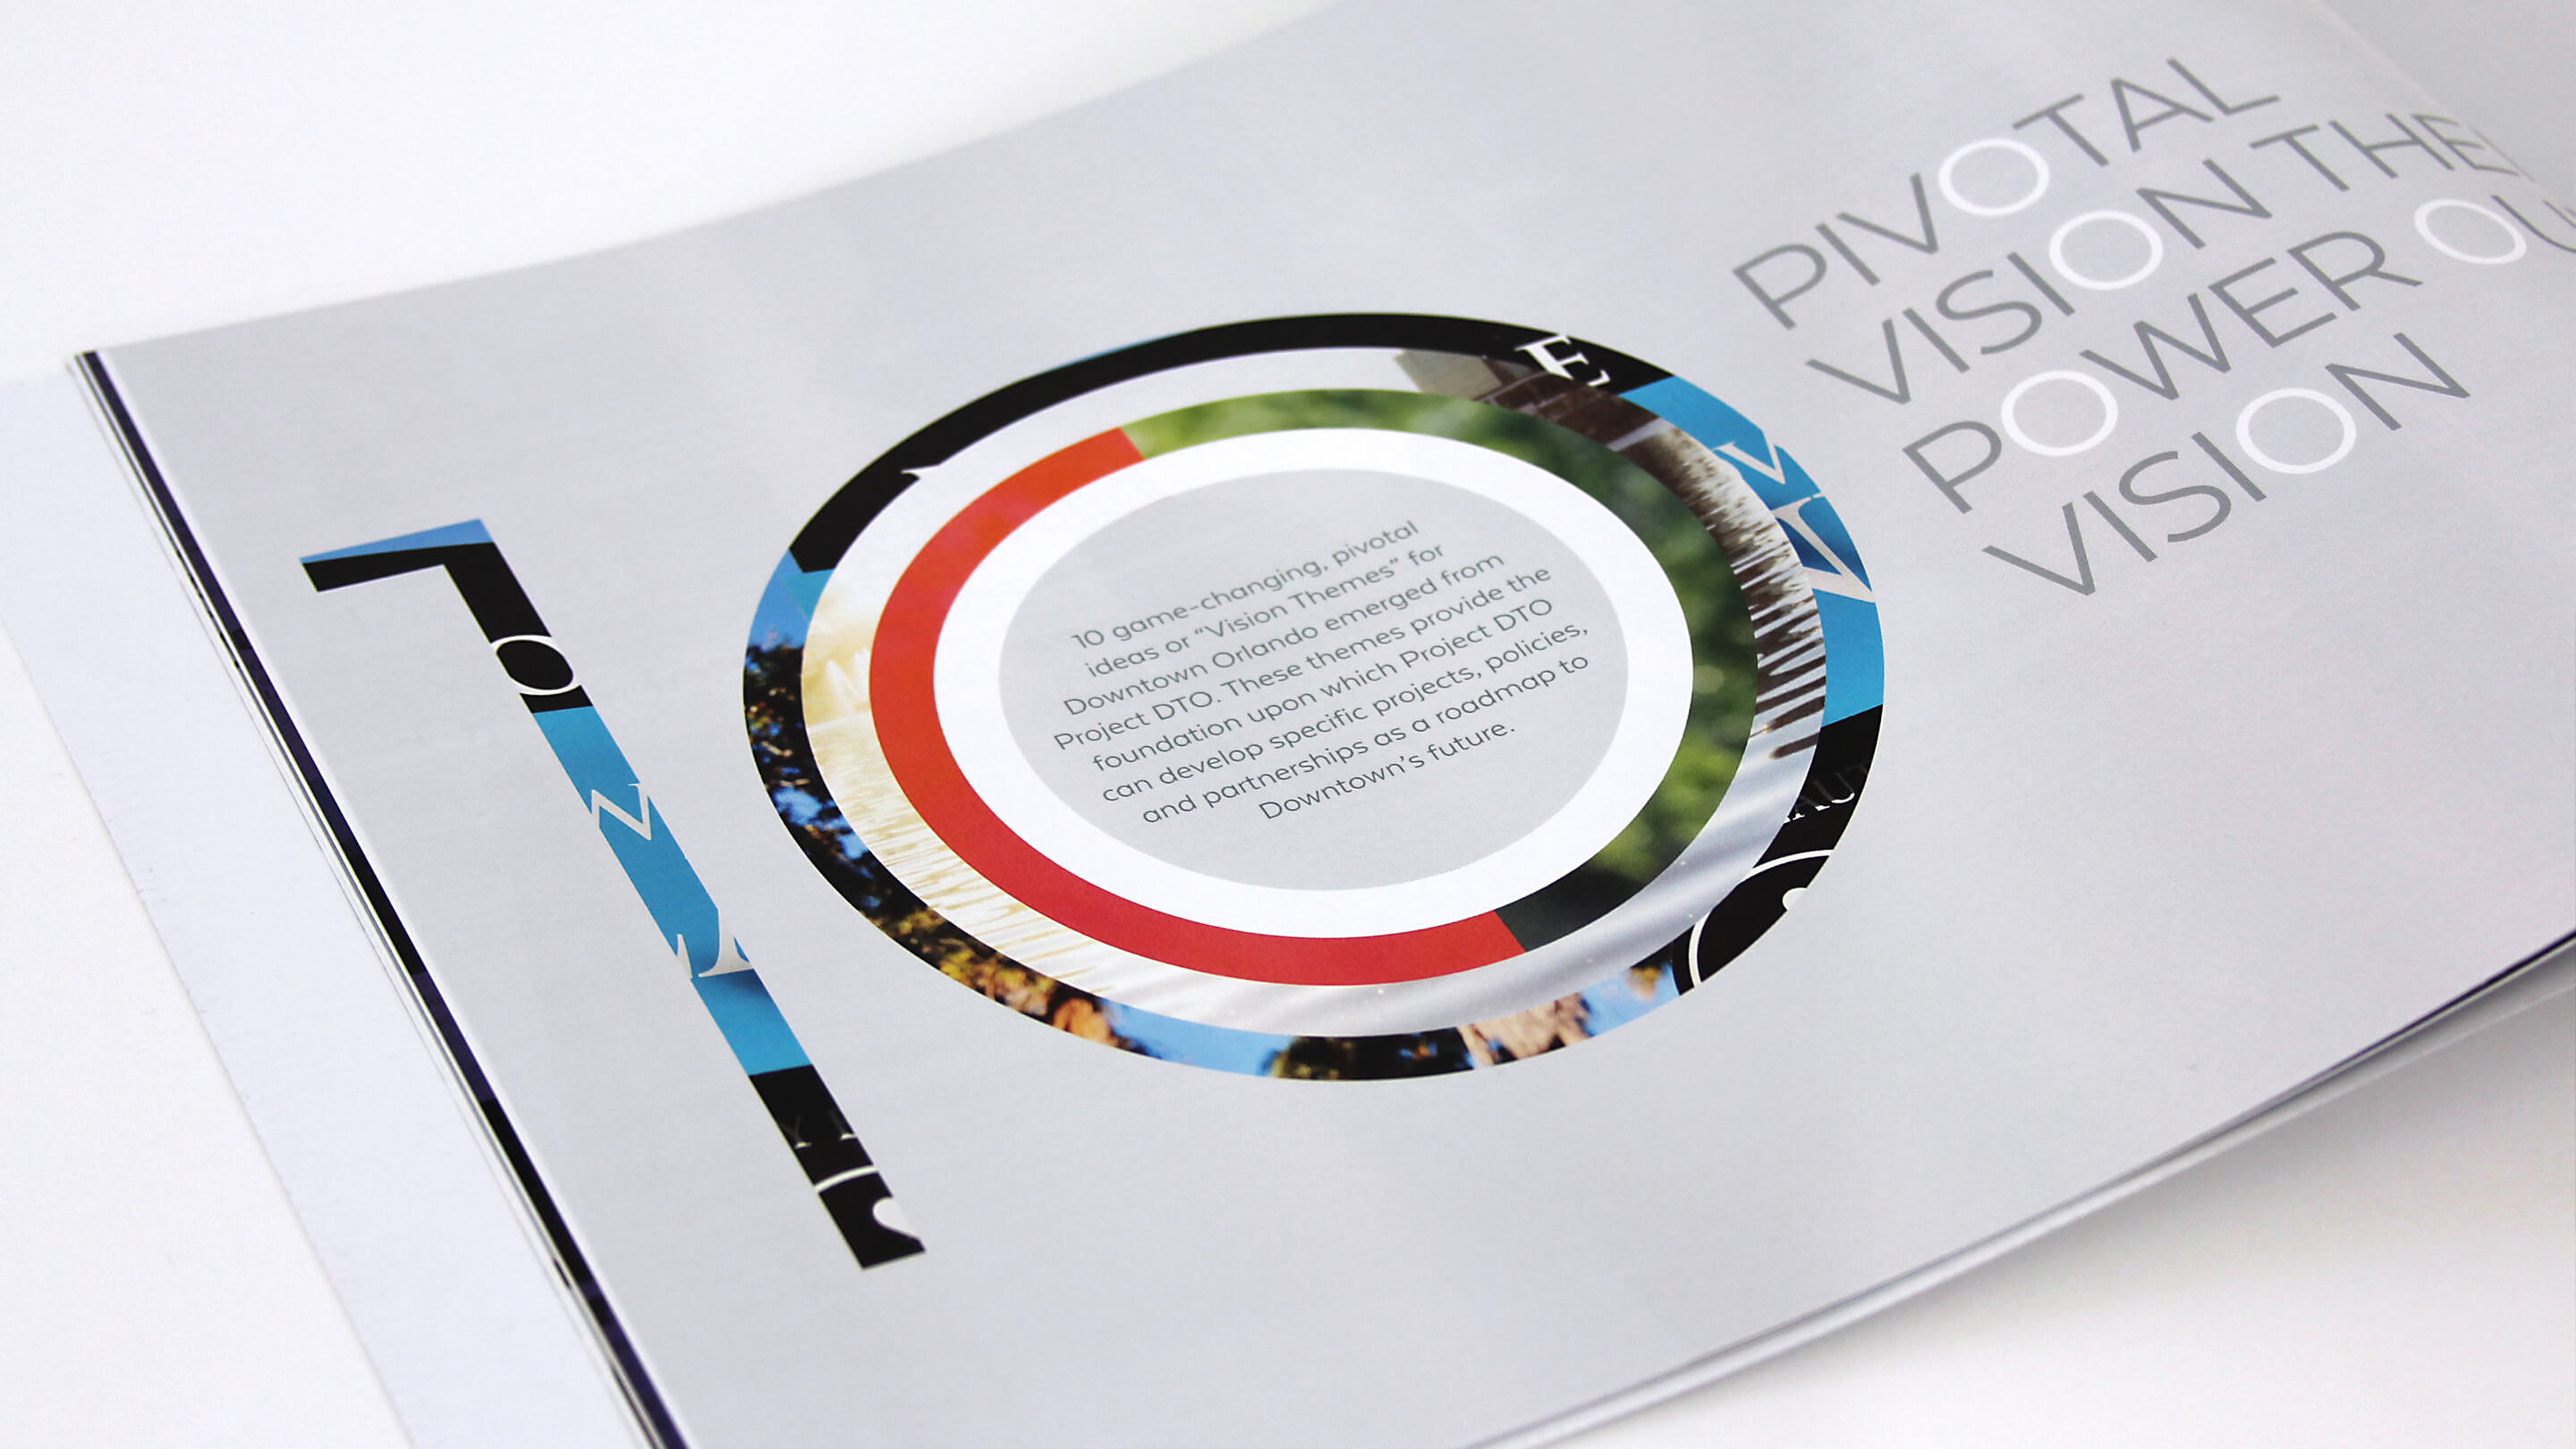 Print materials for Project DTO 10 vision themes